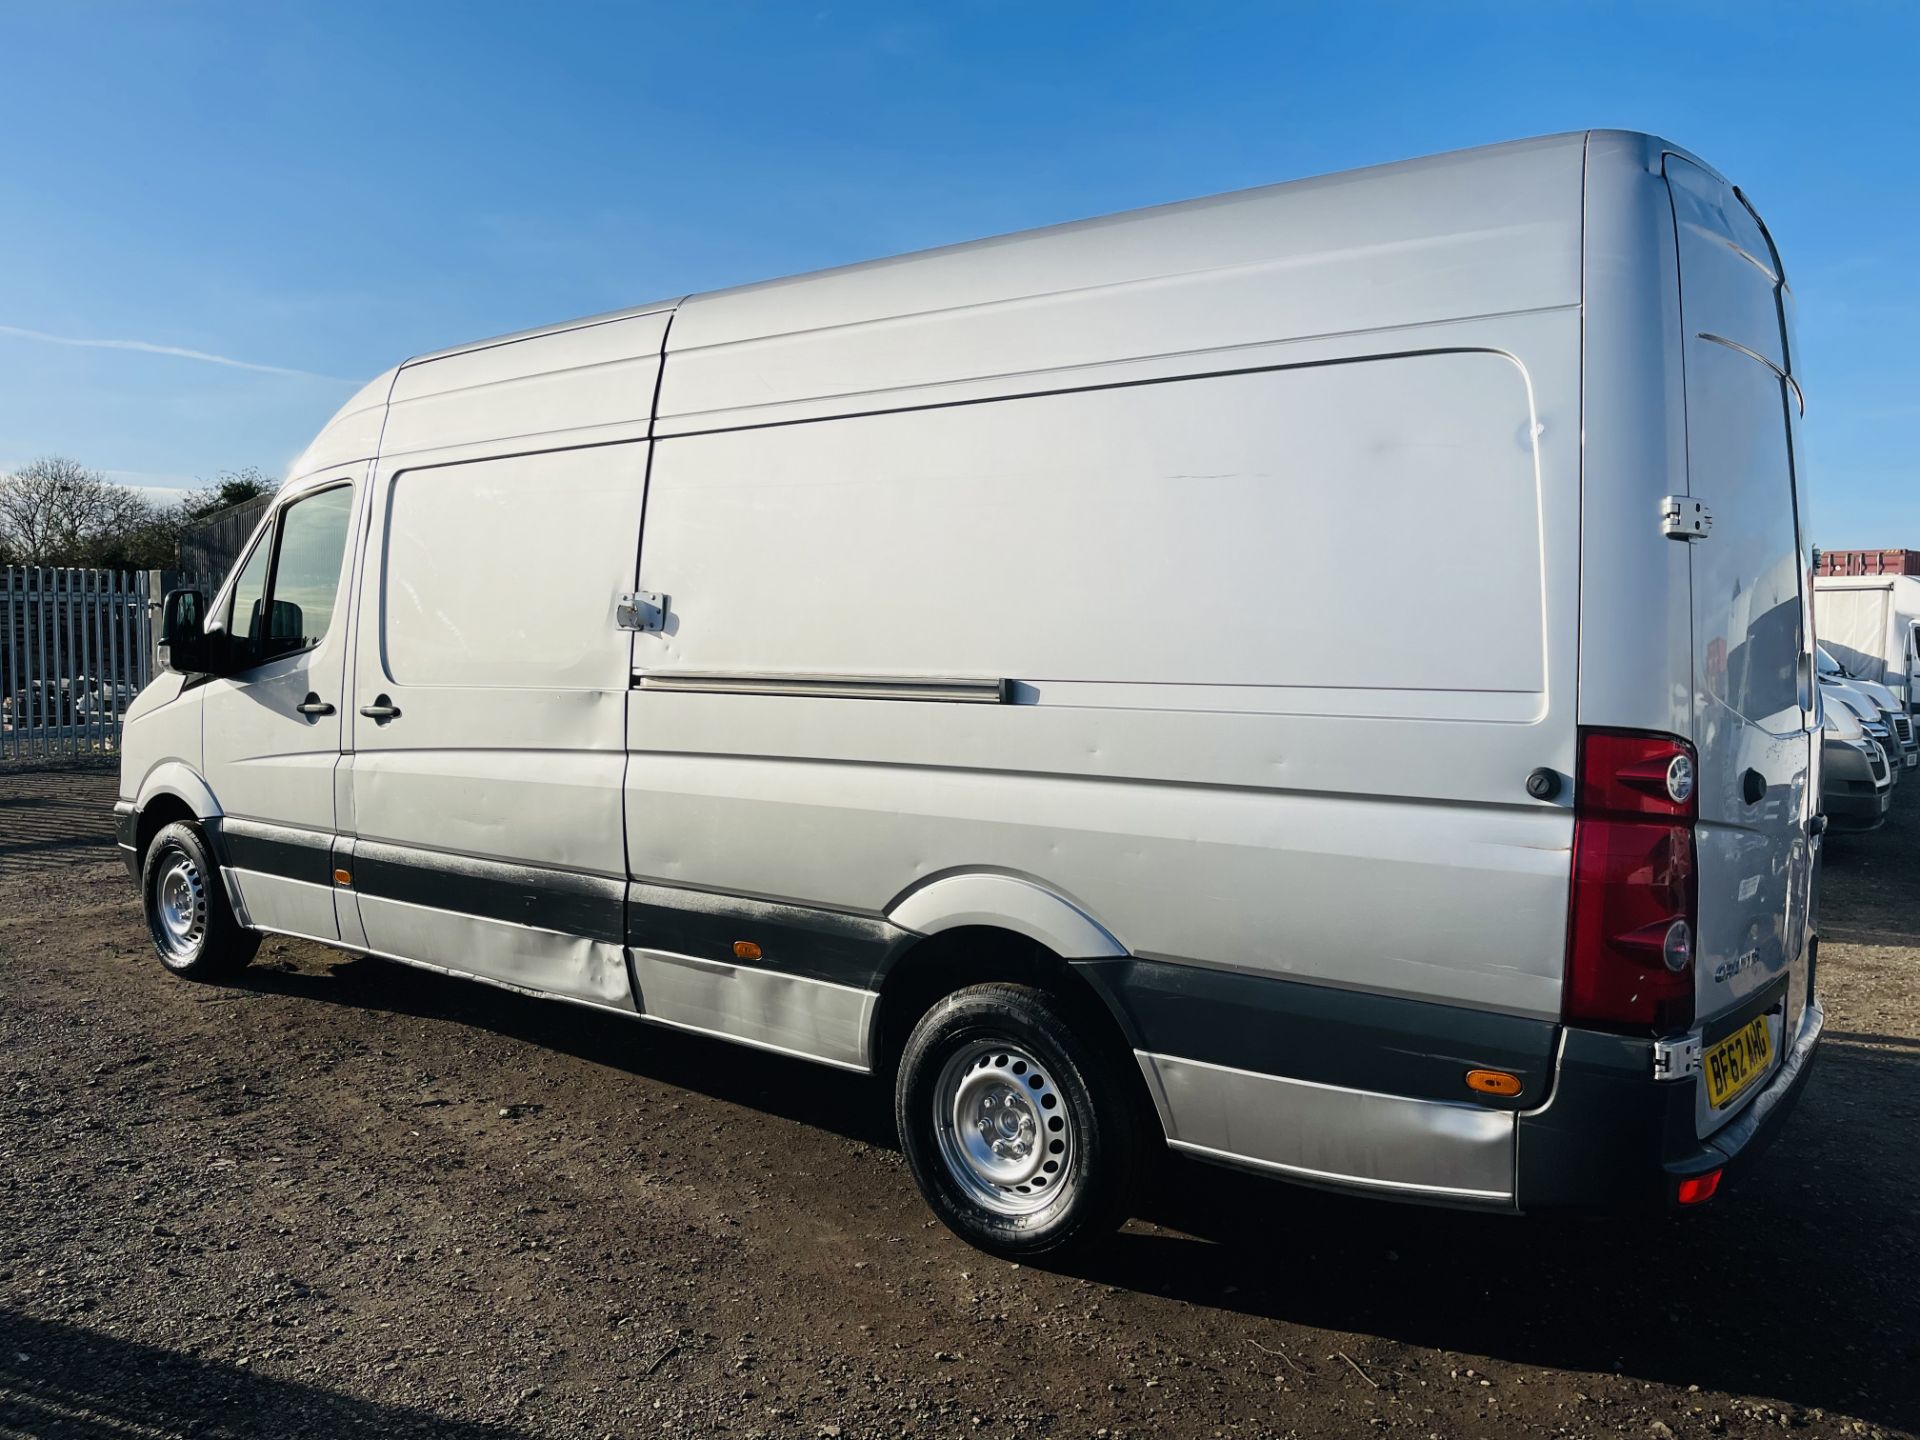 Volkswagen Crafter CR35 2.0 TDI 109 Bluemotion L3 H2 2012 '62 Reg' Air Con - Cruise Control - No Vat - Image 6 of 19